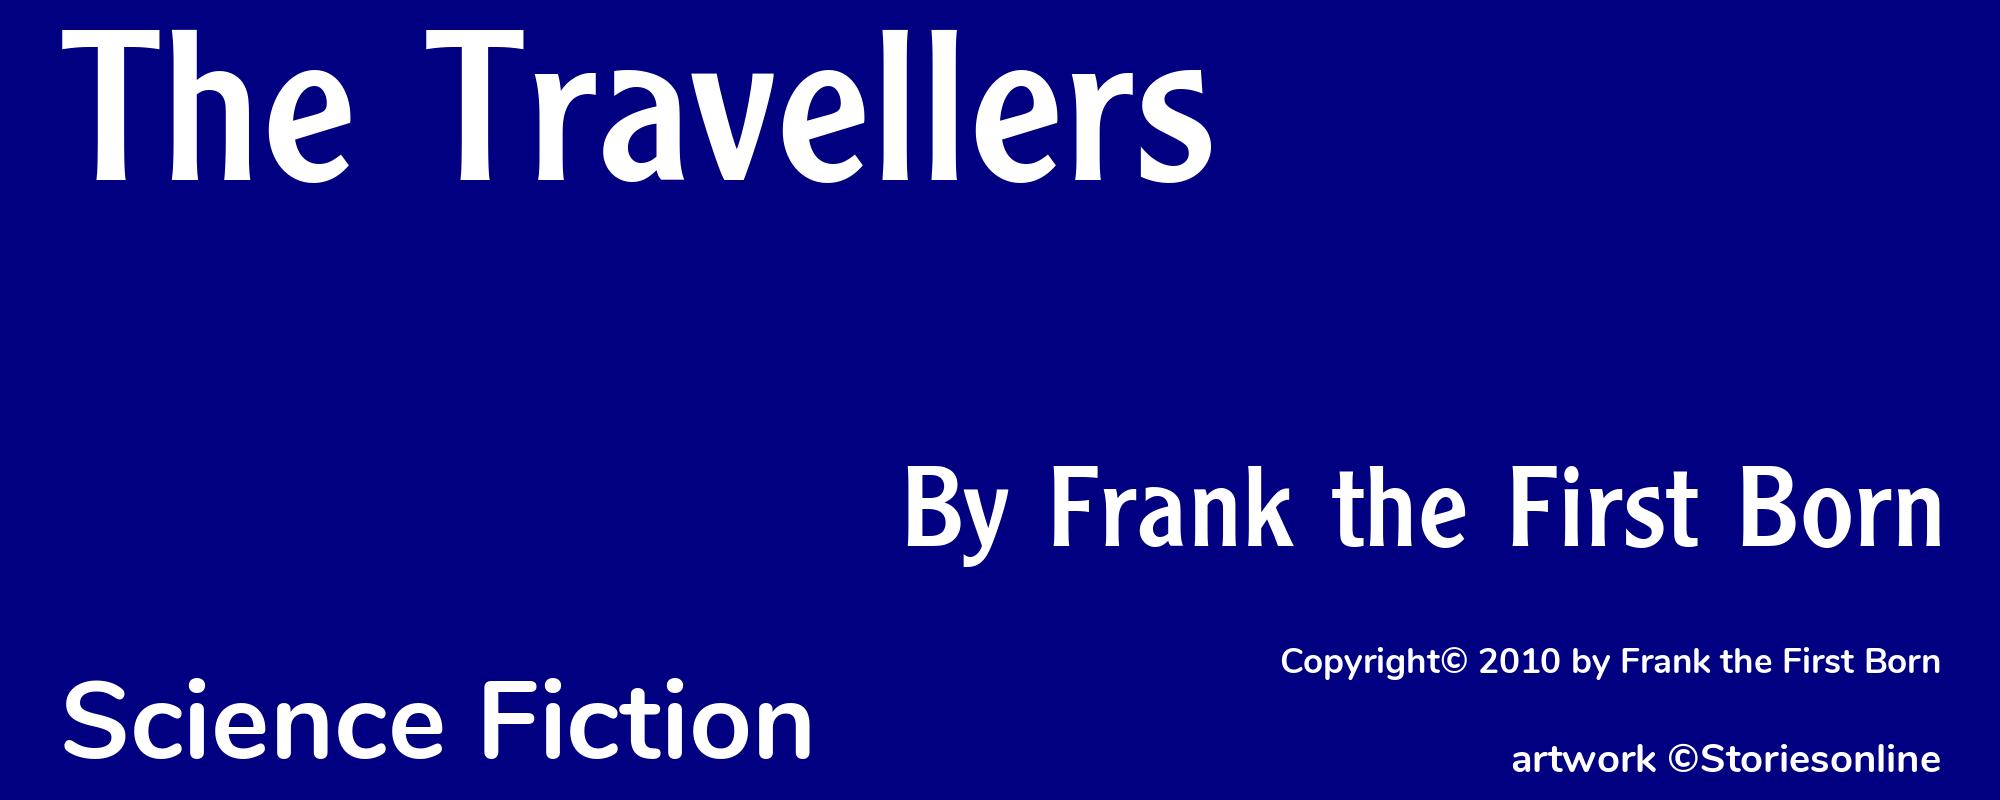 The Travellers - Cover